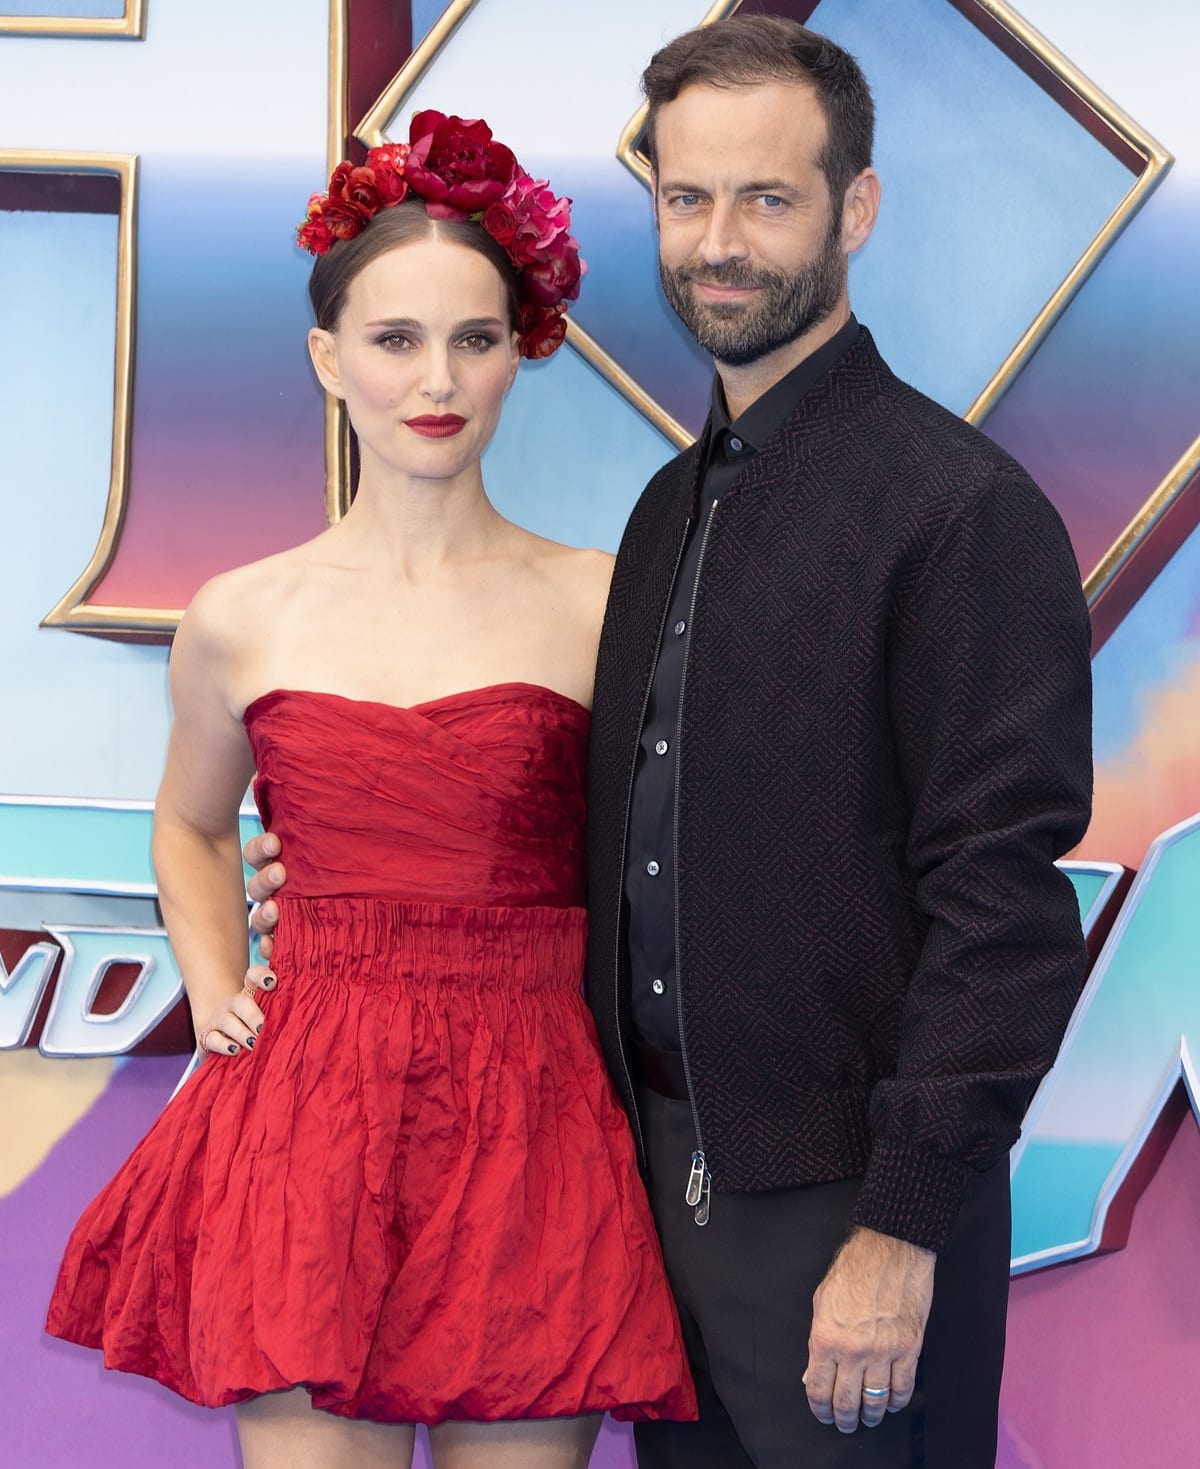 Natalie Portman and her husband, Benjamin Millepied, are privately navigating marital difficulties following recent allegations of Millepied's extramarital affair, although the couple remains together and is working through the situation